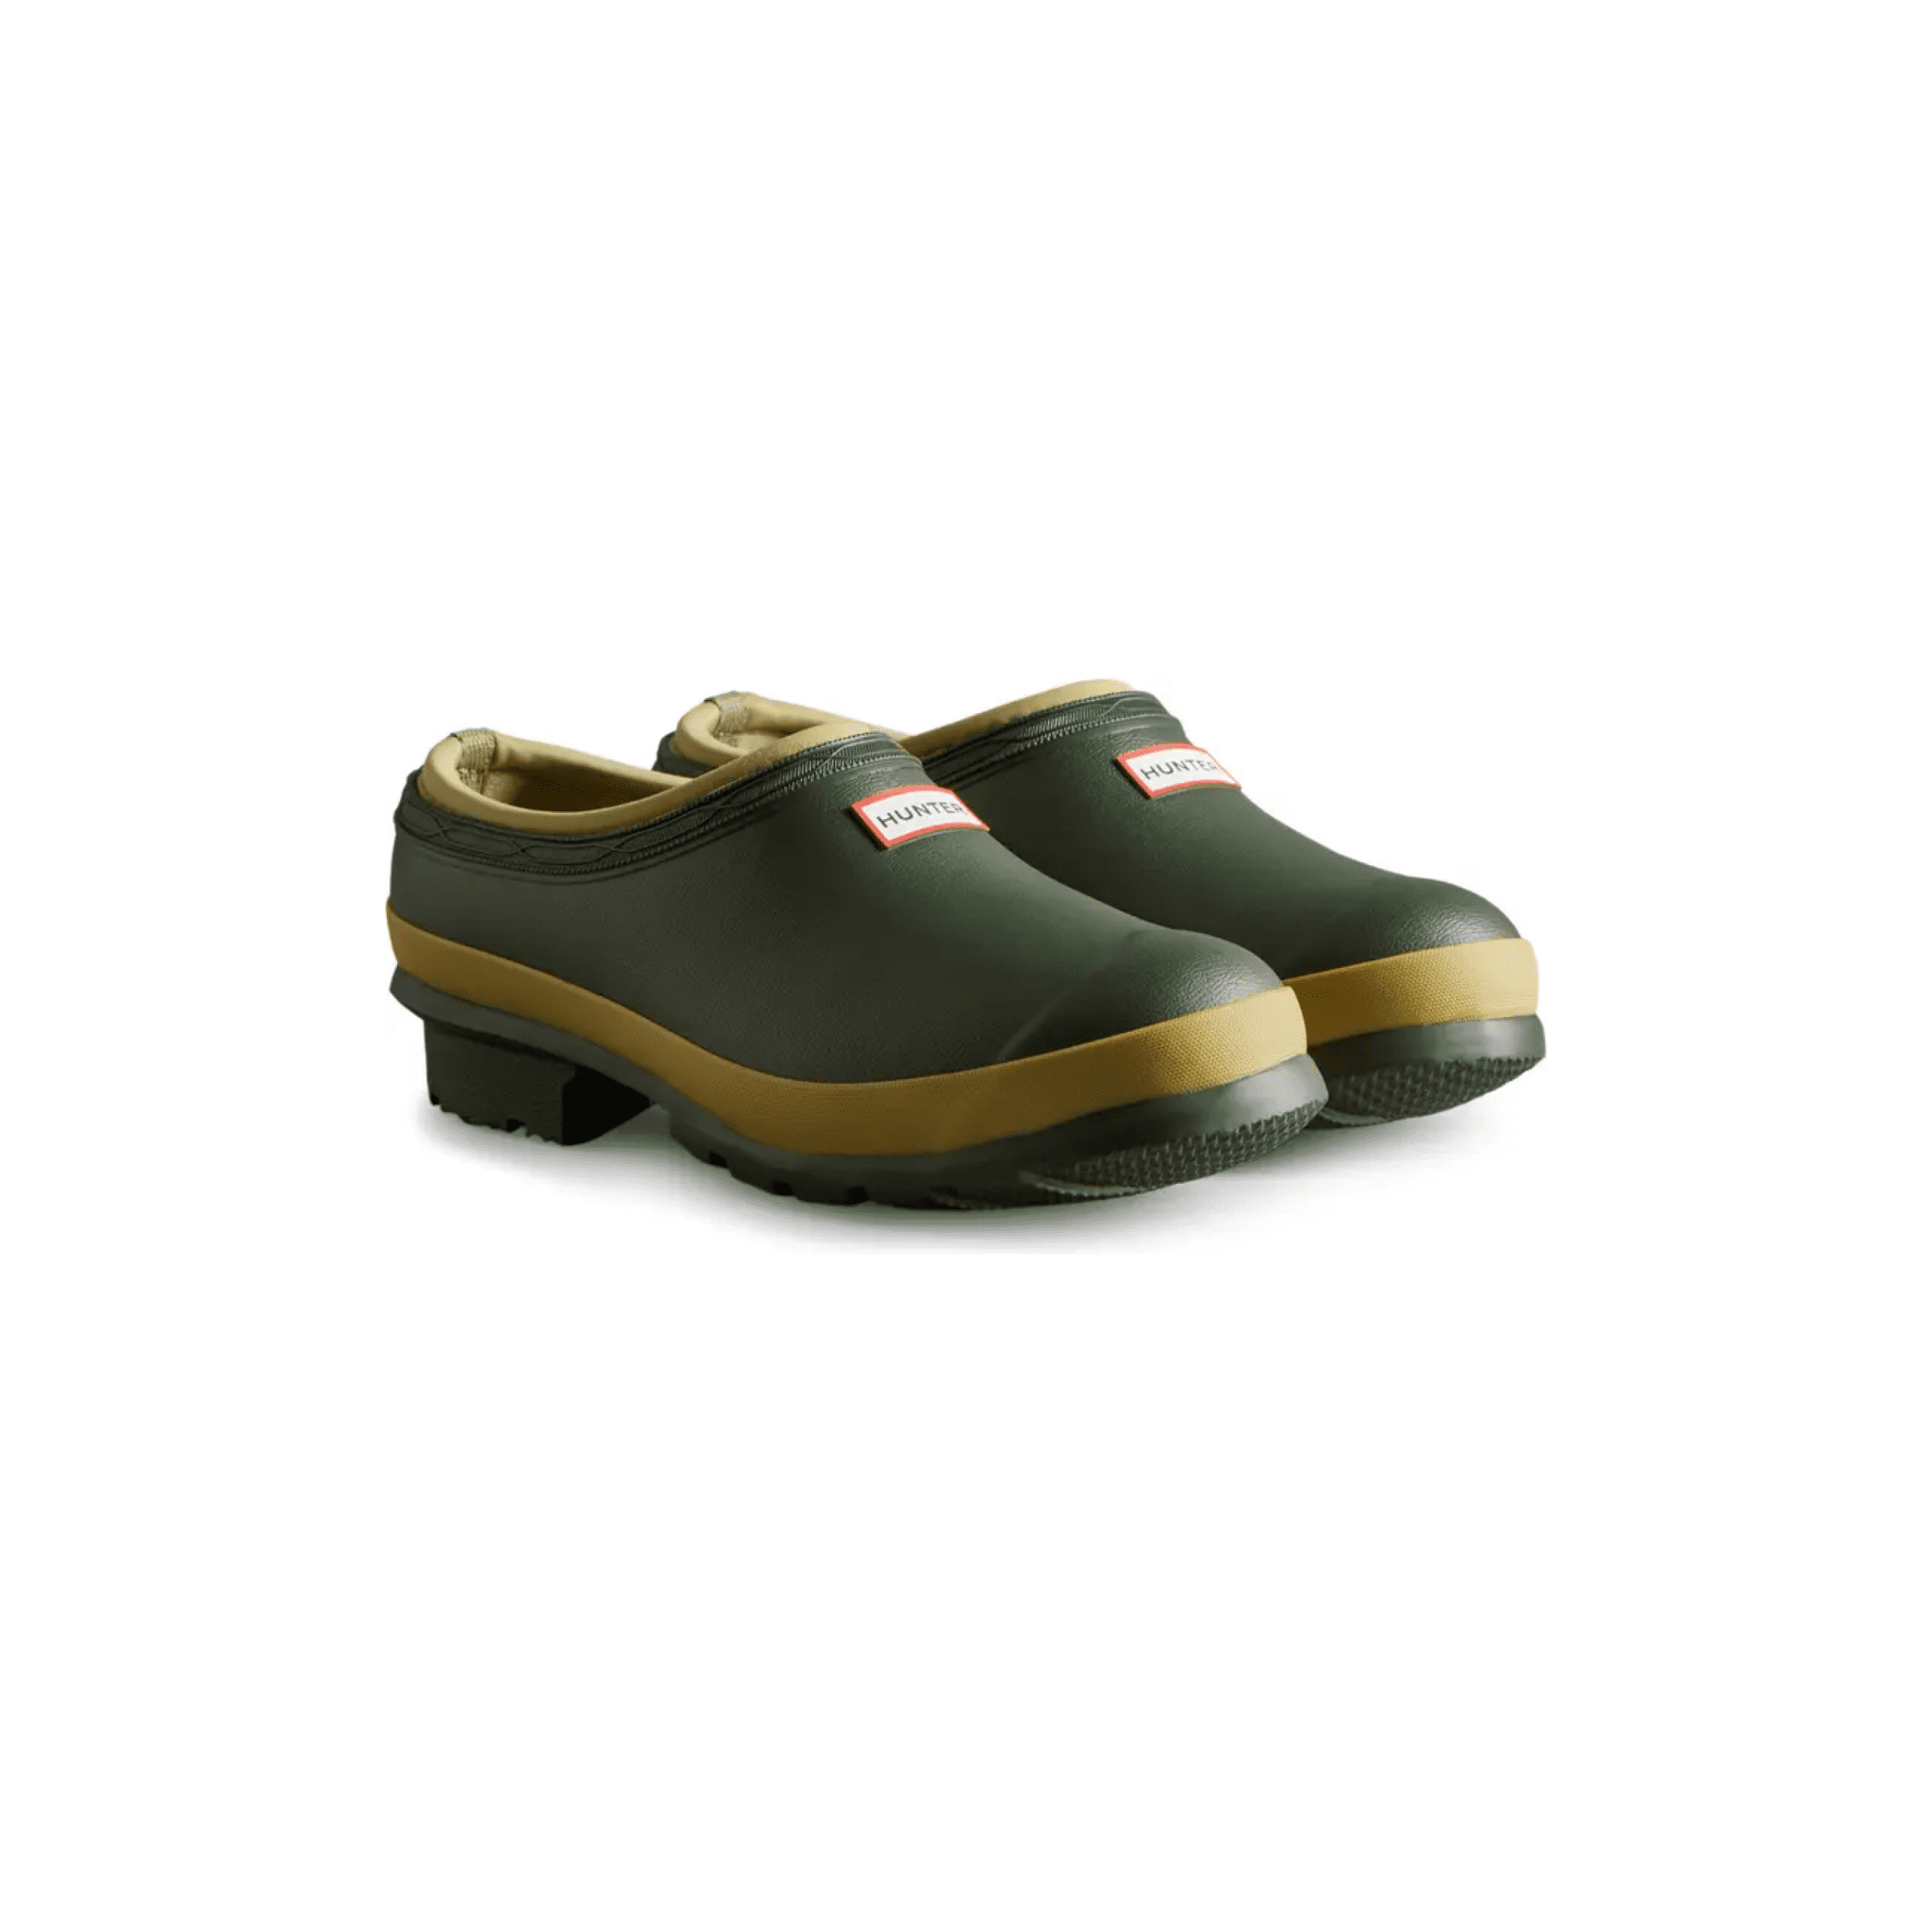 Hunter Garden Clogs | Wit & Delight | Designing a Life Well-Lived